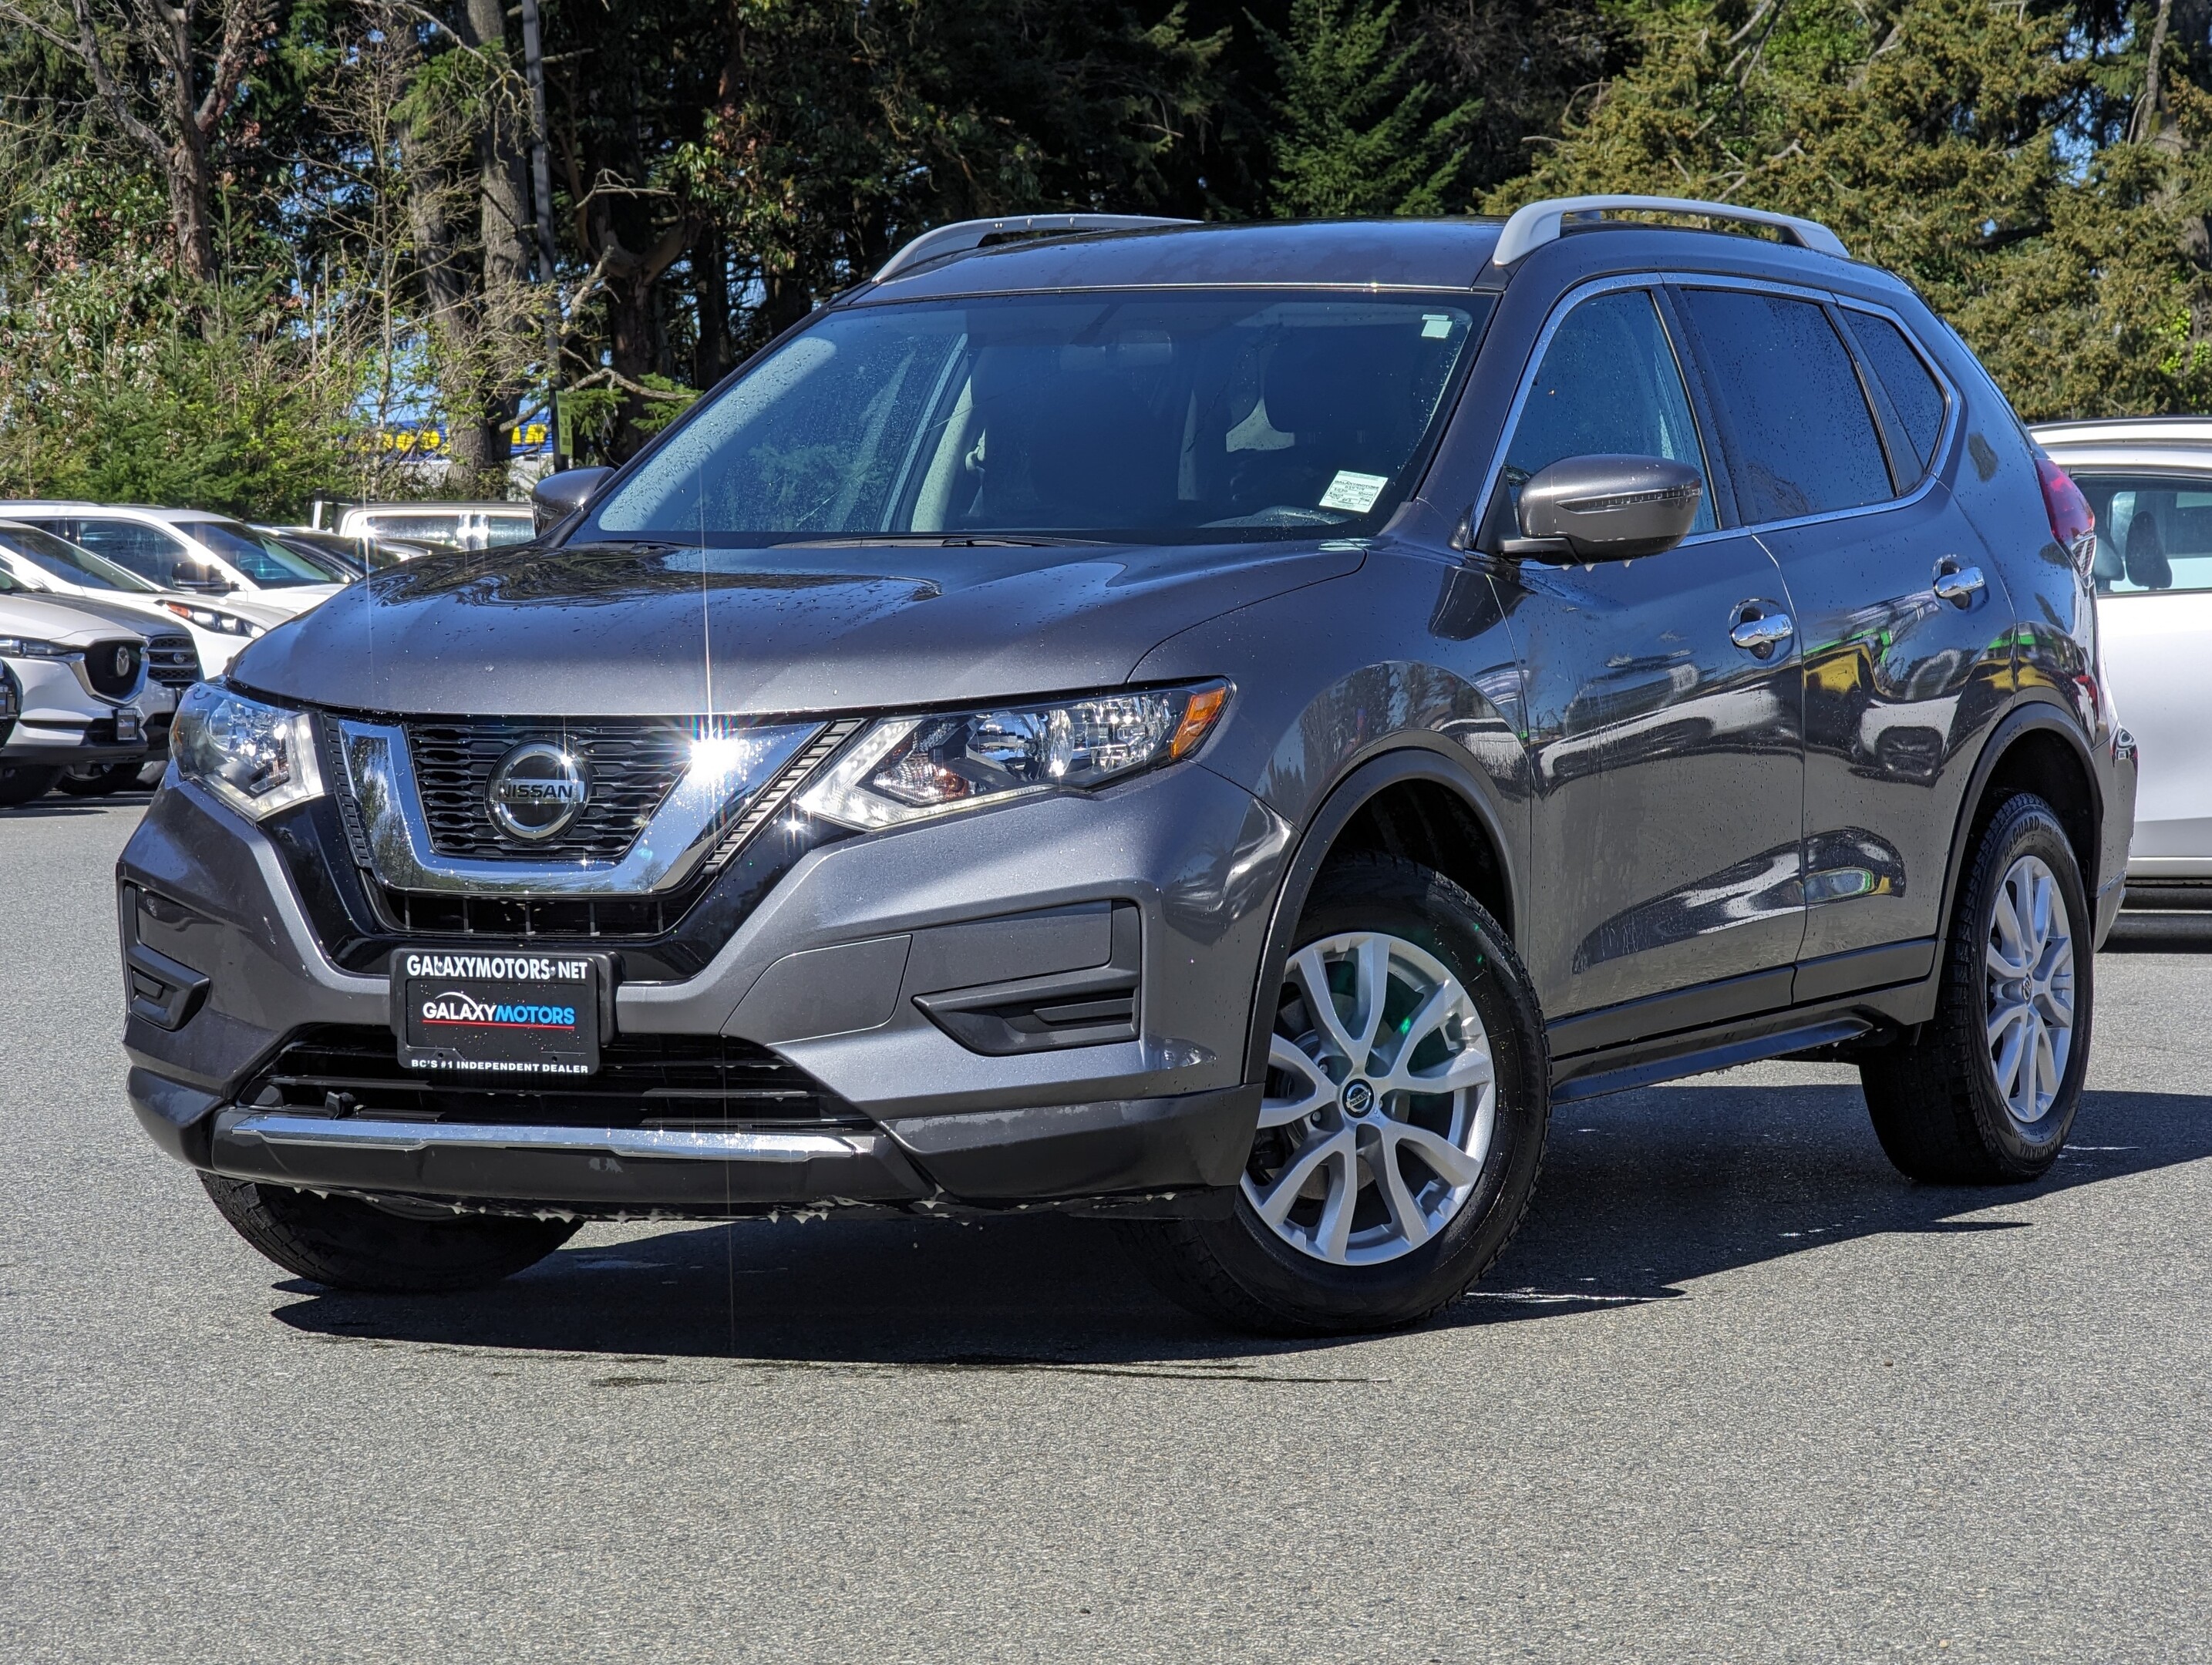 2020 Nissan Rogue S - No Accidents, Heated Seats, AWD